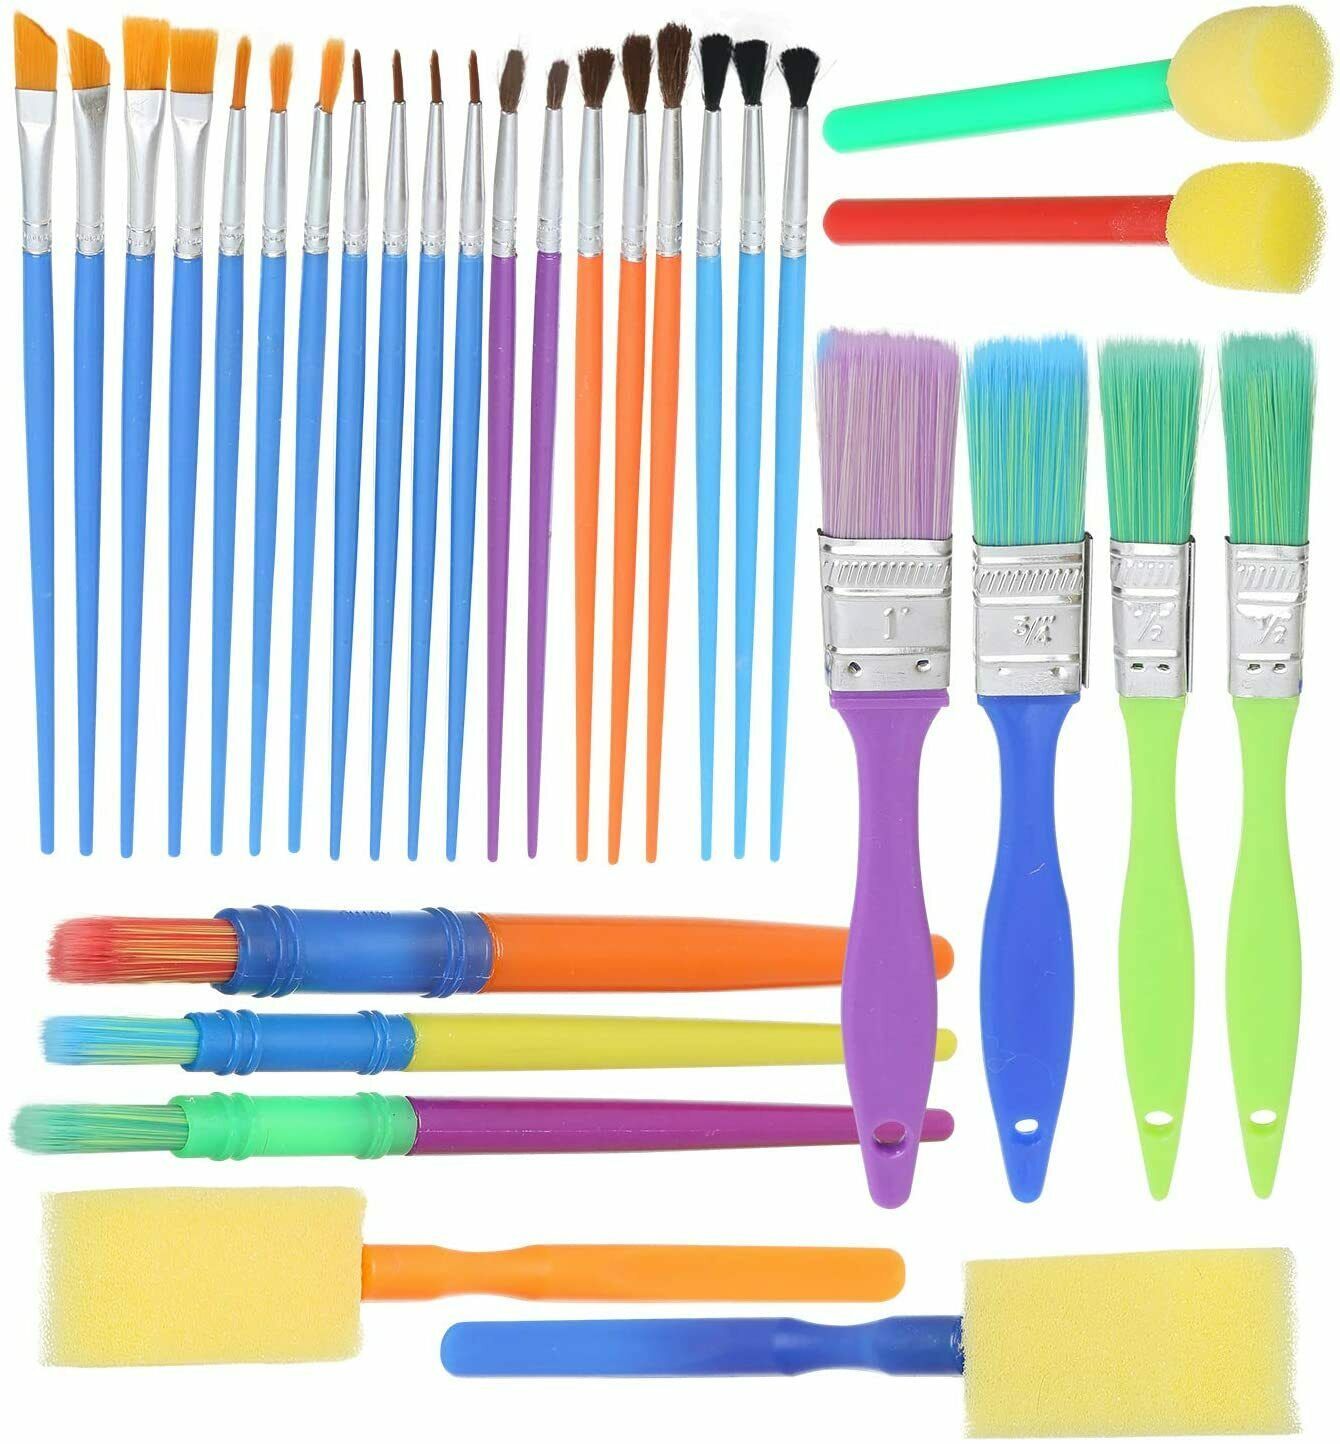 Complete Set of 30 Art Paint Brushes for Kids- Variety of Paintbrushes